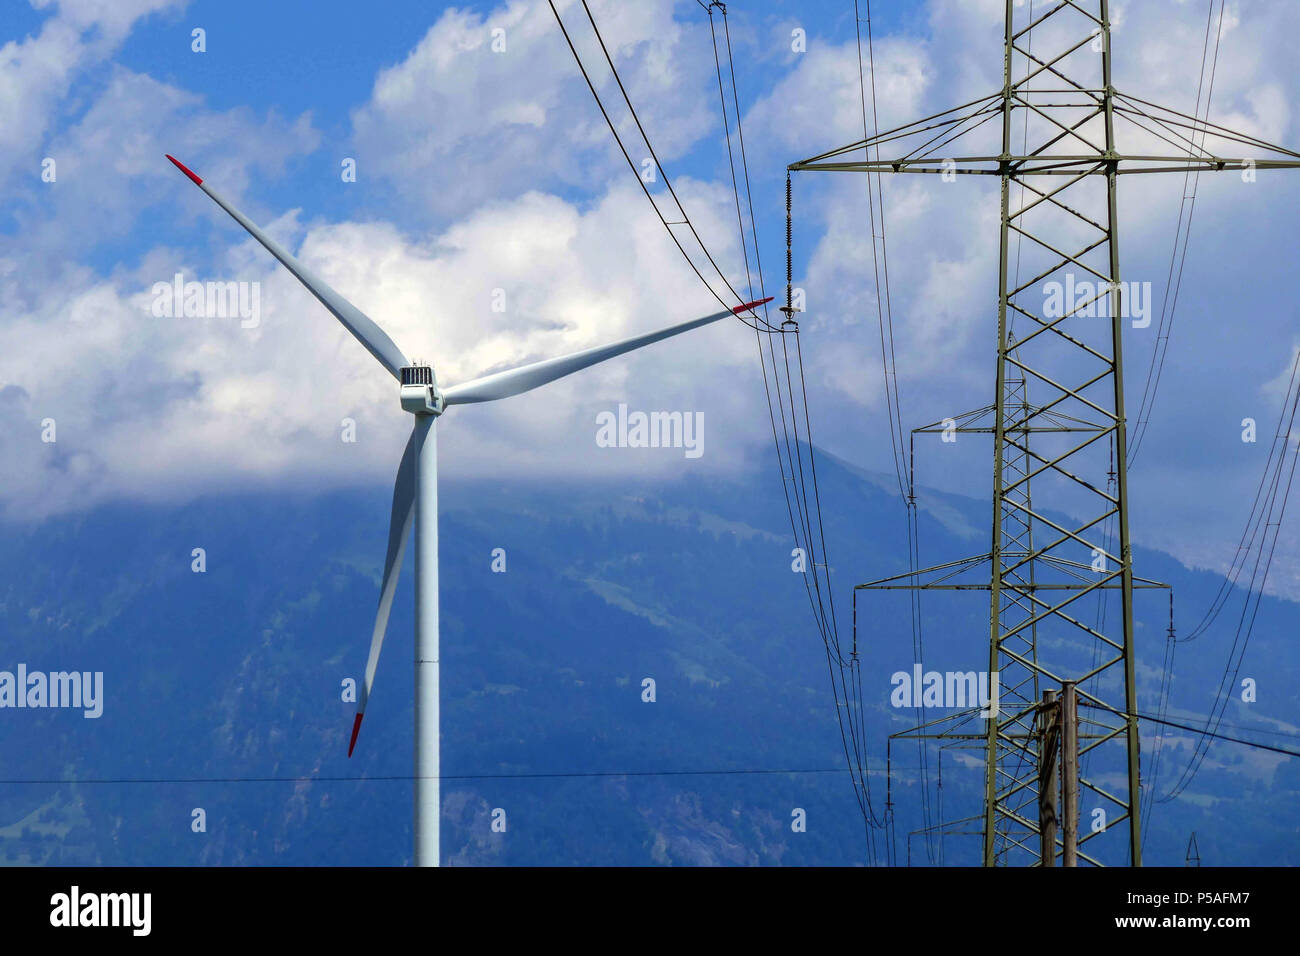 Wind turbine and electricity pylon, with clouds and mountains, Switzerland Stock Photo